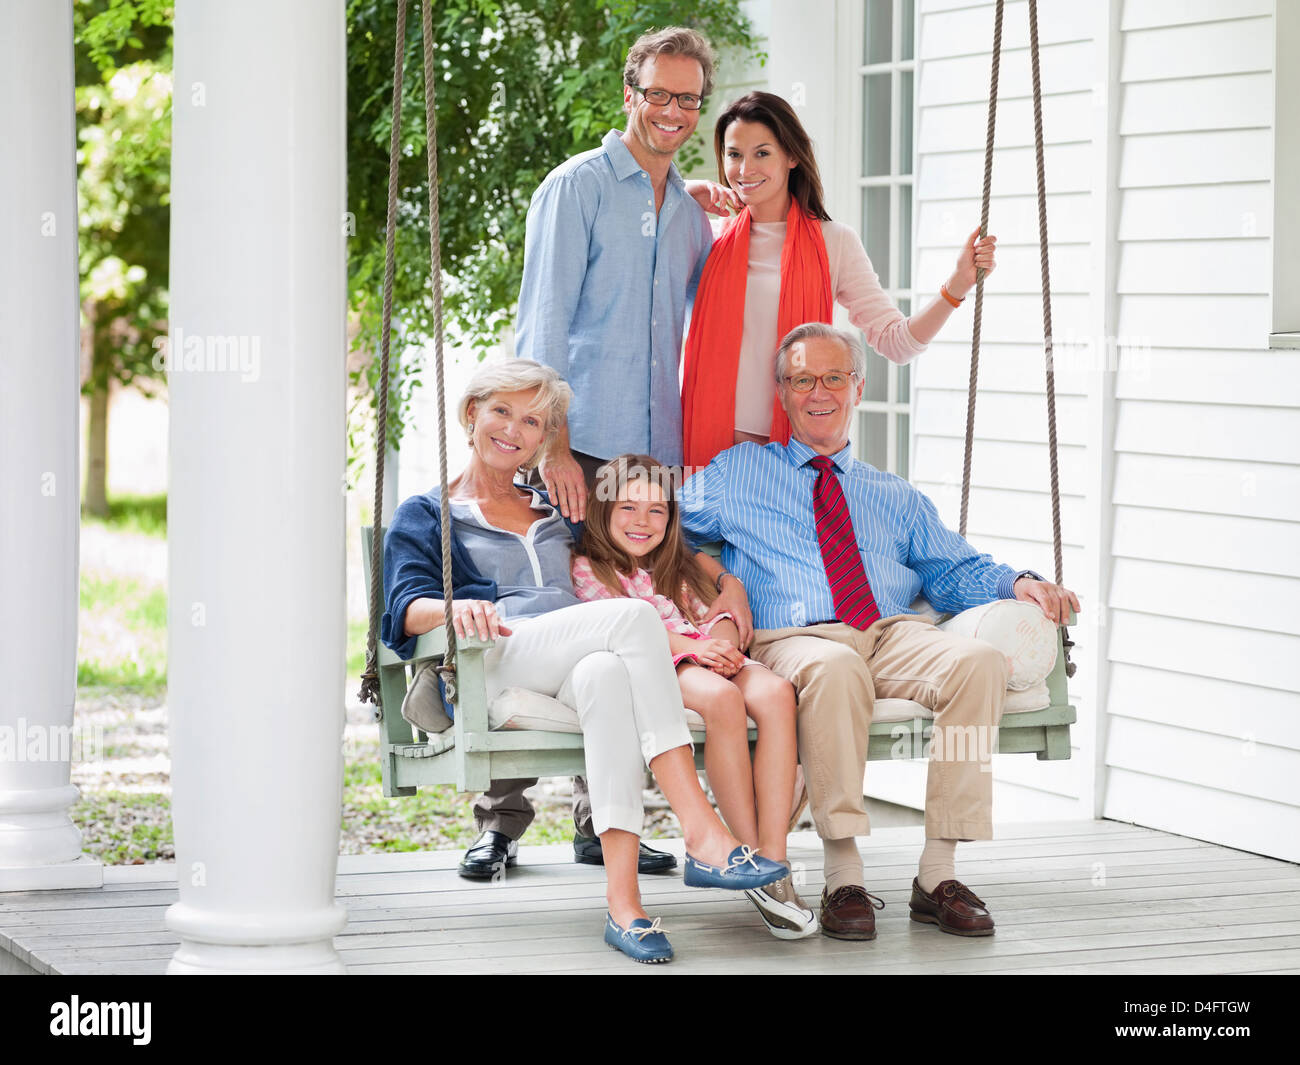 Family smiling together on porch Banque D'Images